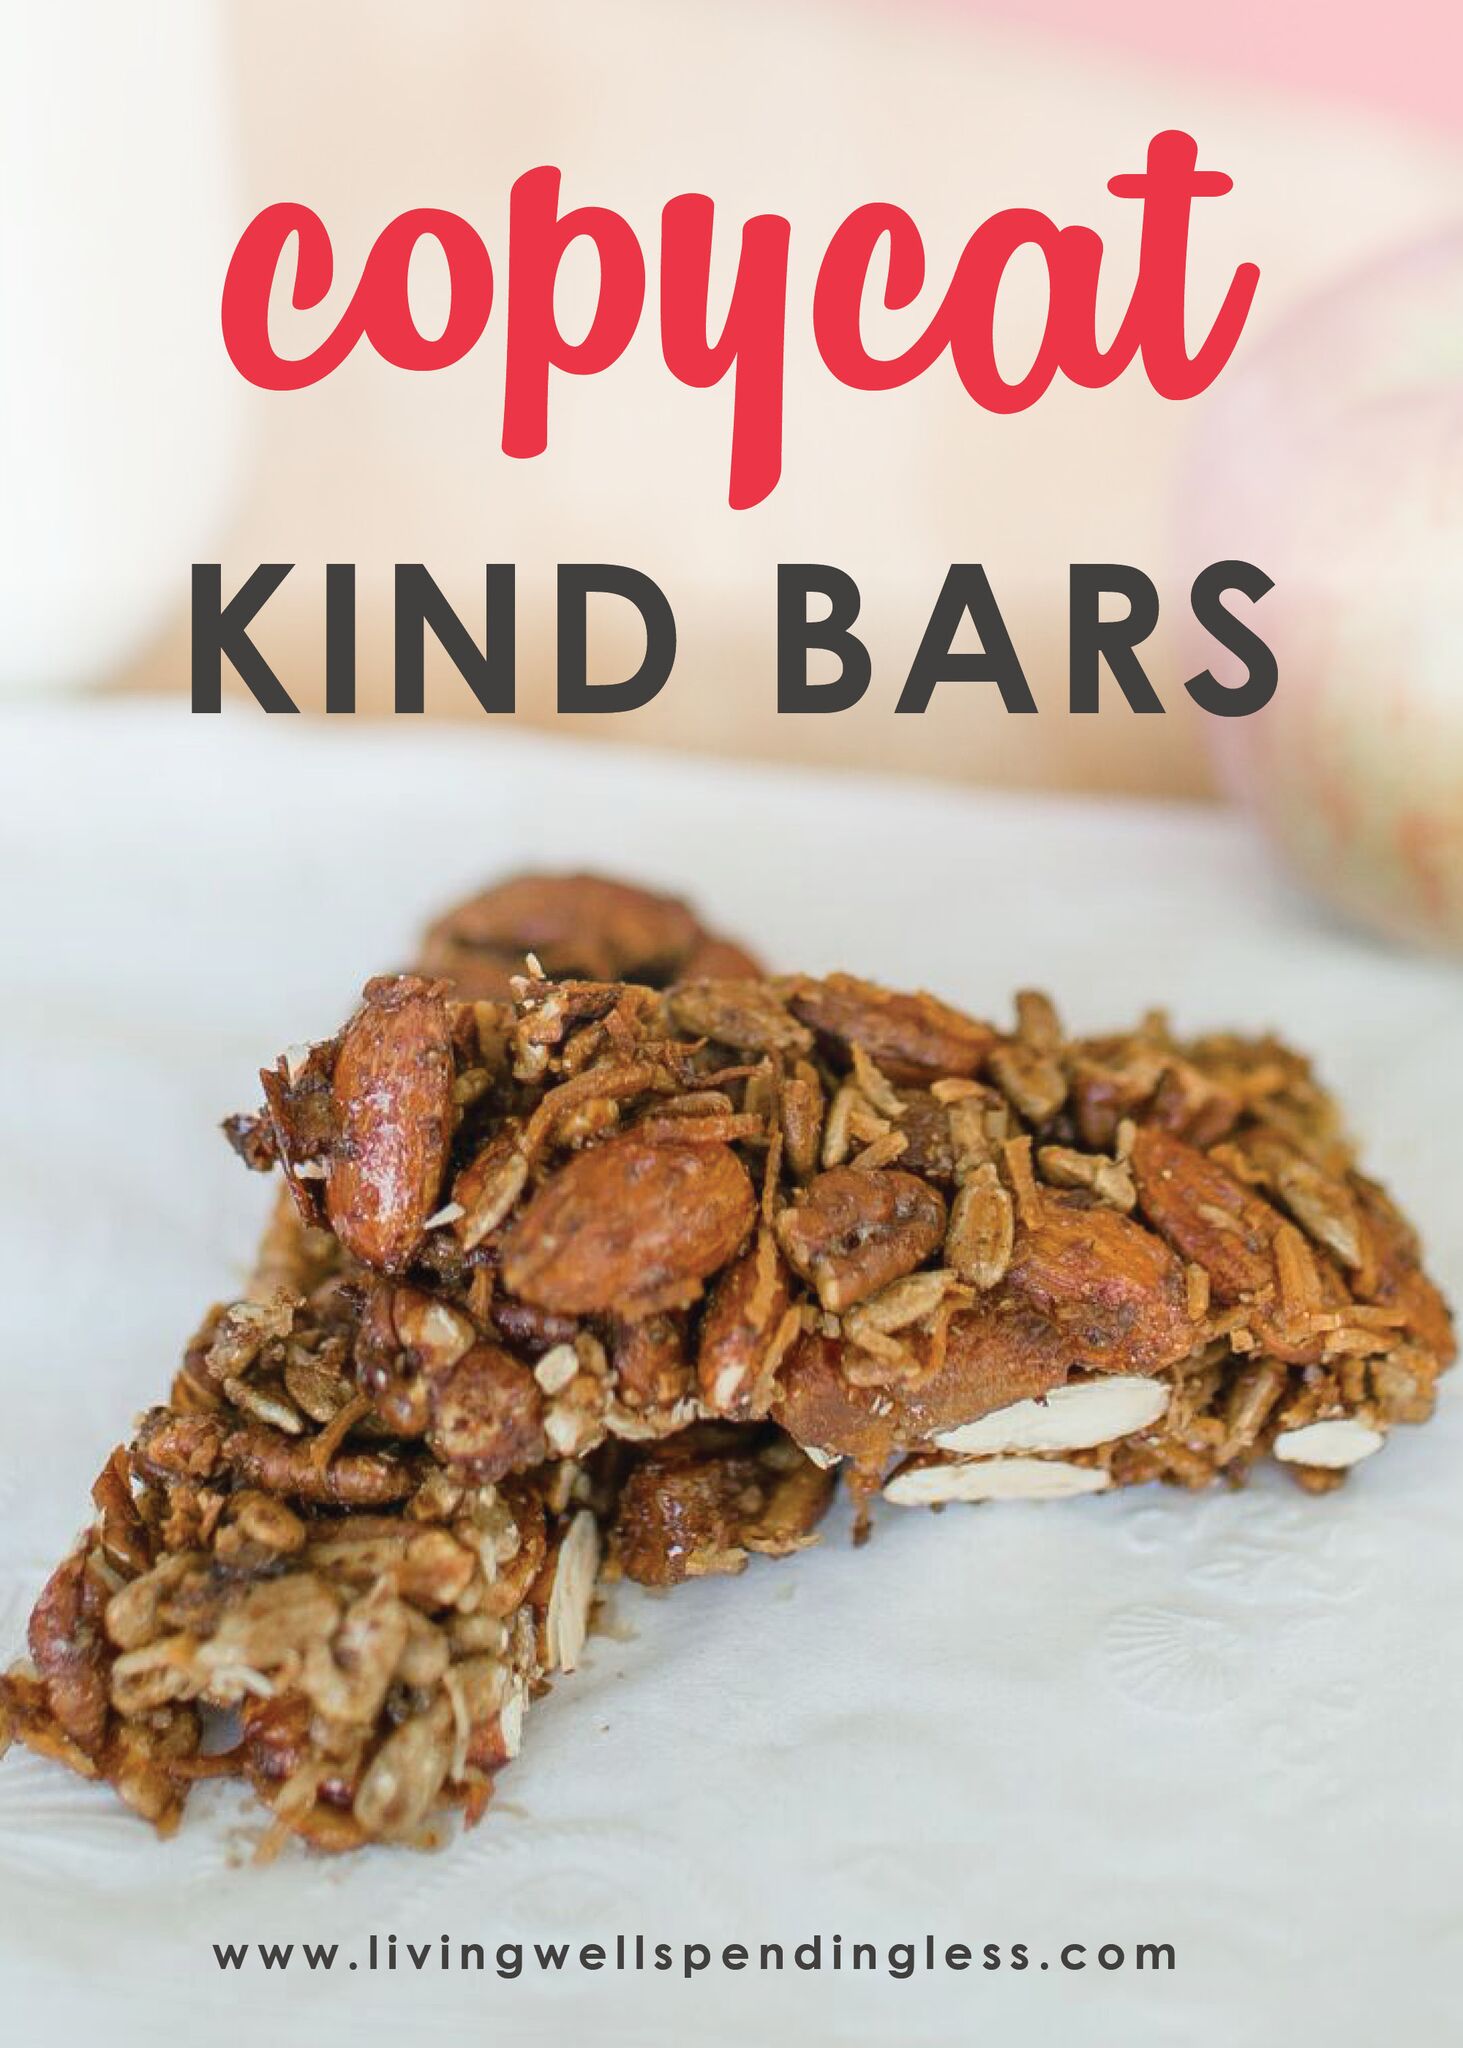 Copycat Kind Bars⎢Healthy Homemade Snack Bars⎢Gluten Free⎢Dairy Free⎢Snack Light⎢Quick and Easy Snack Recipe⎢Food Prep⎢Meal Prep